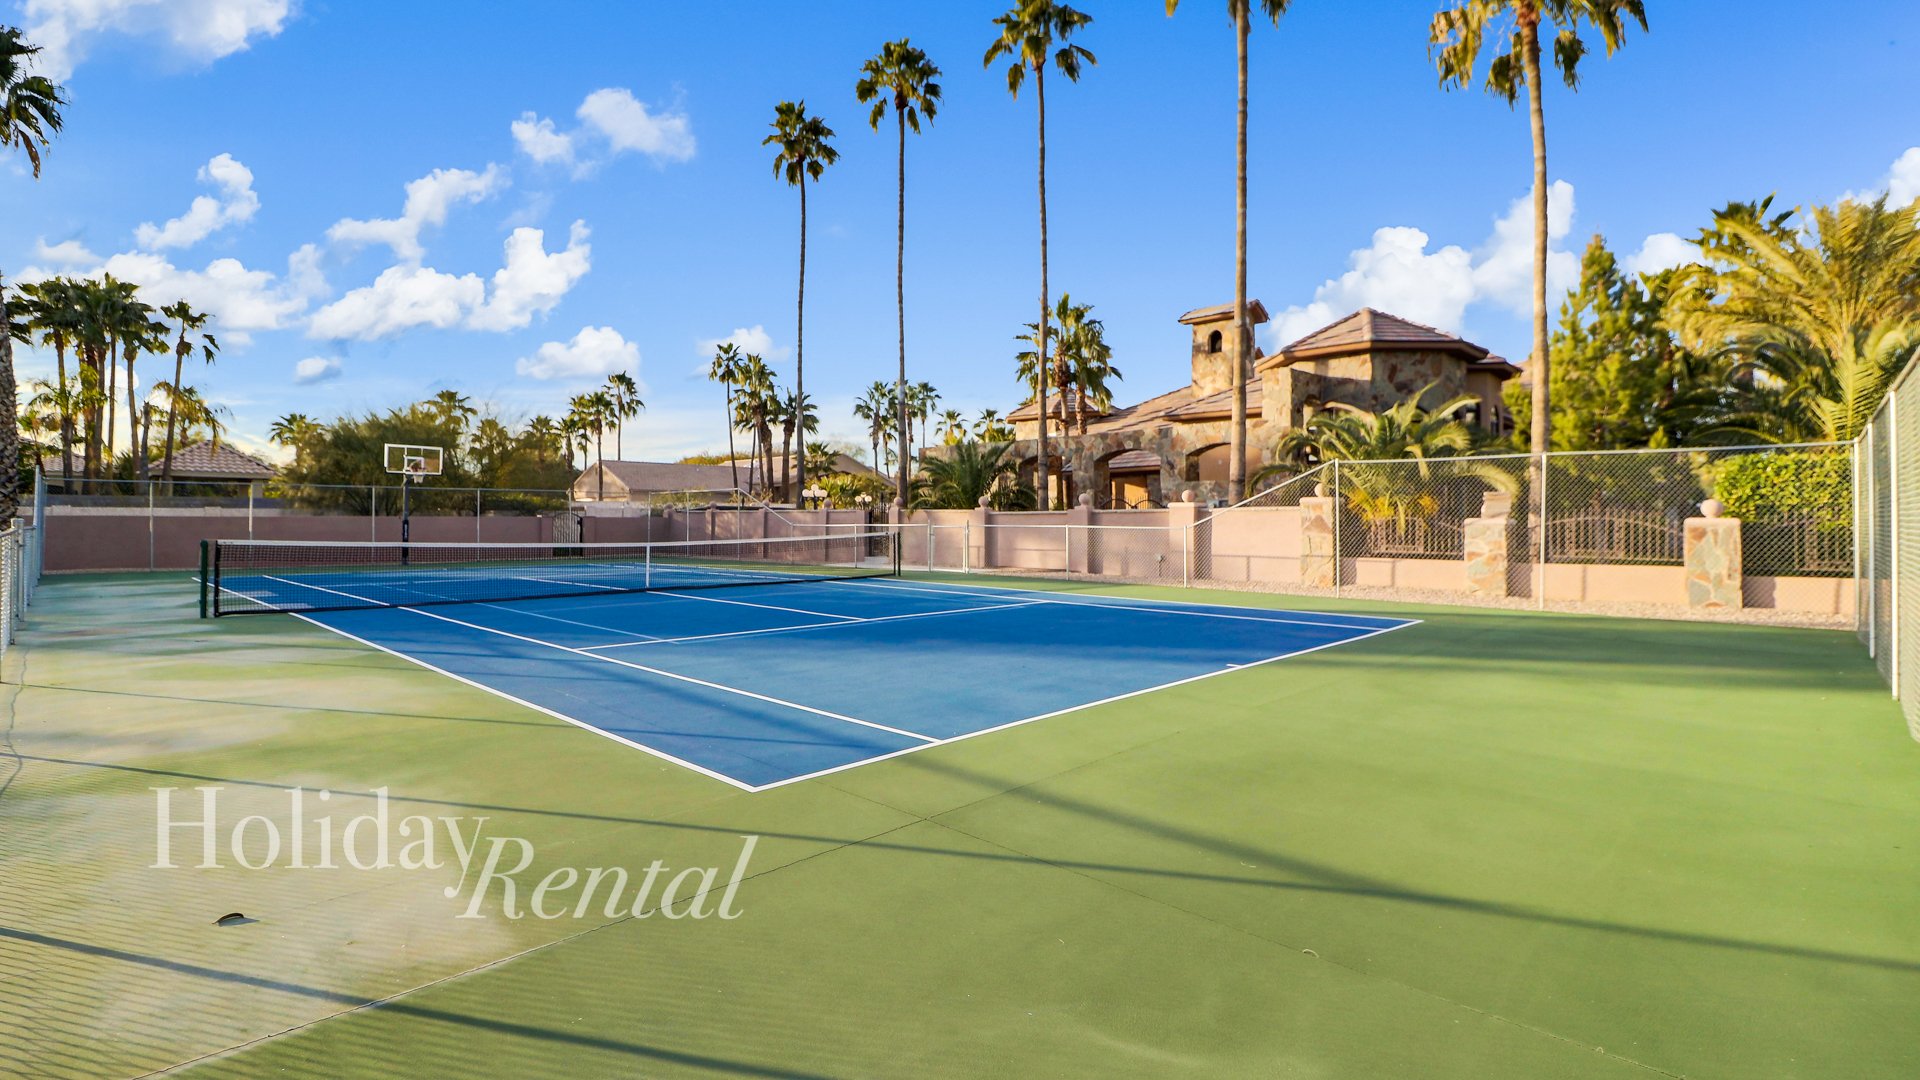 Sport court with tennis, pickleball, and basketball